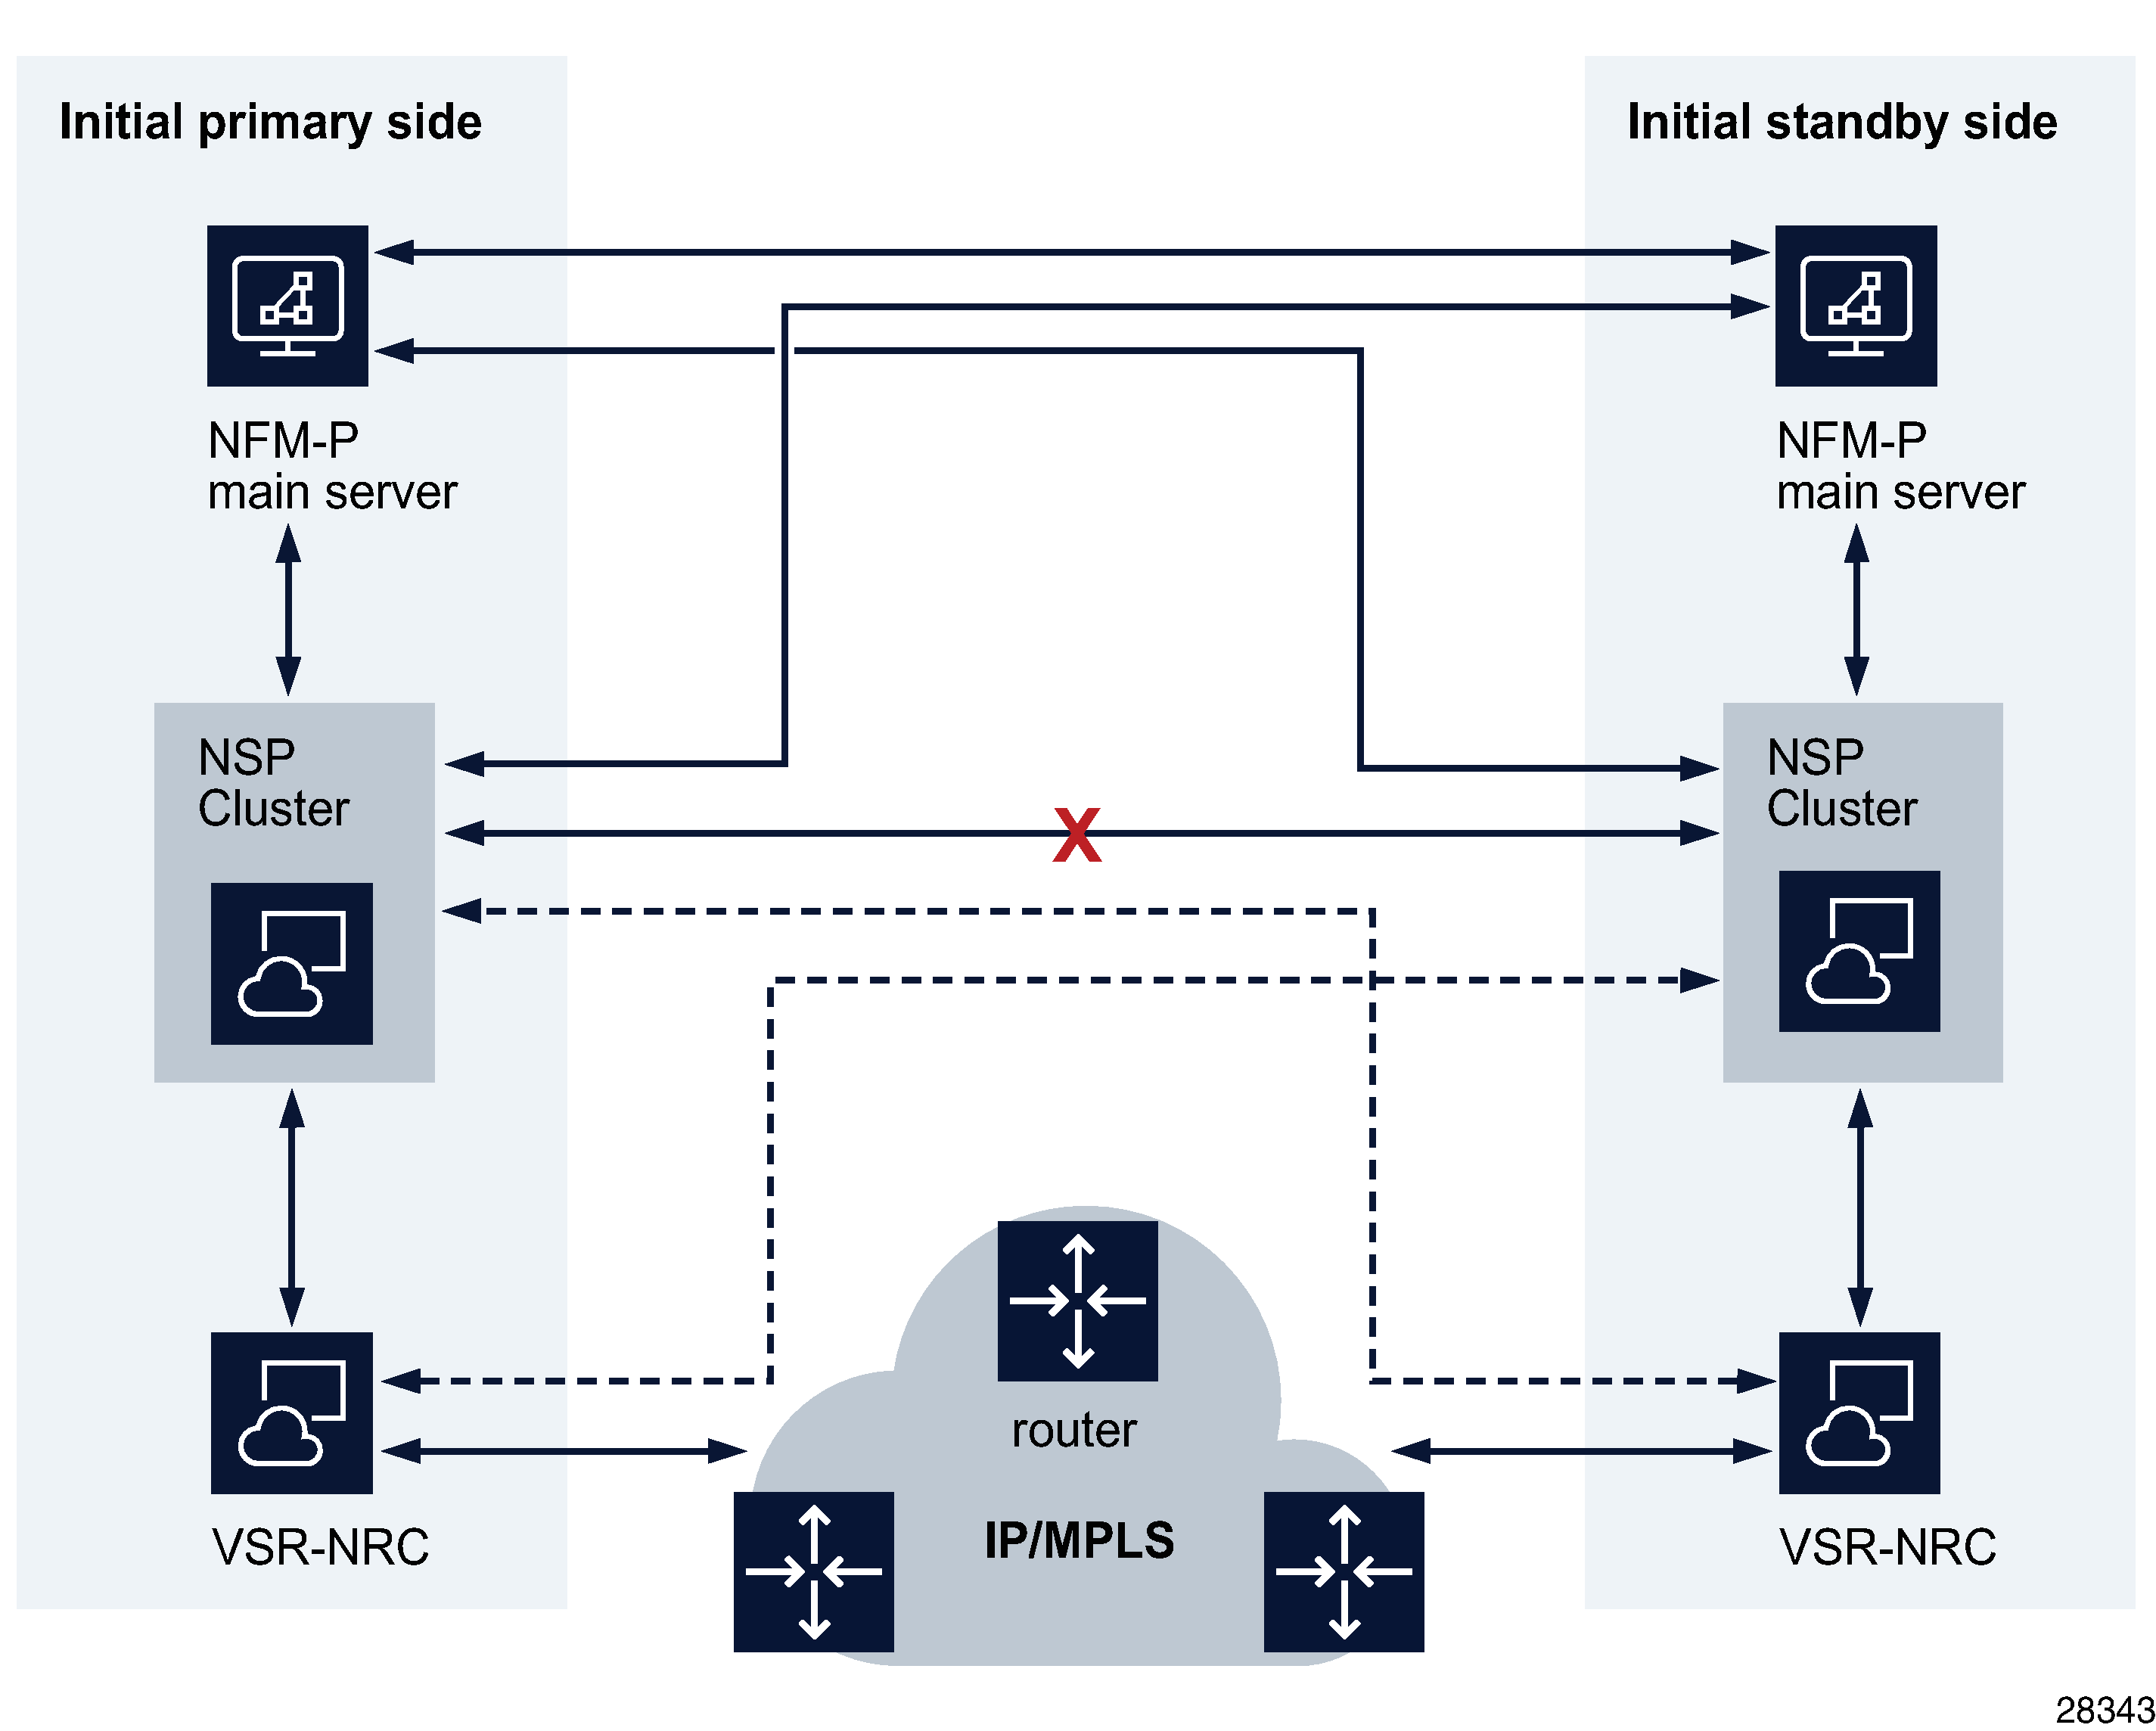 Primary and standby NSP cluster communication failure